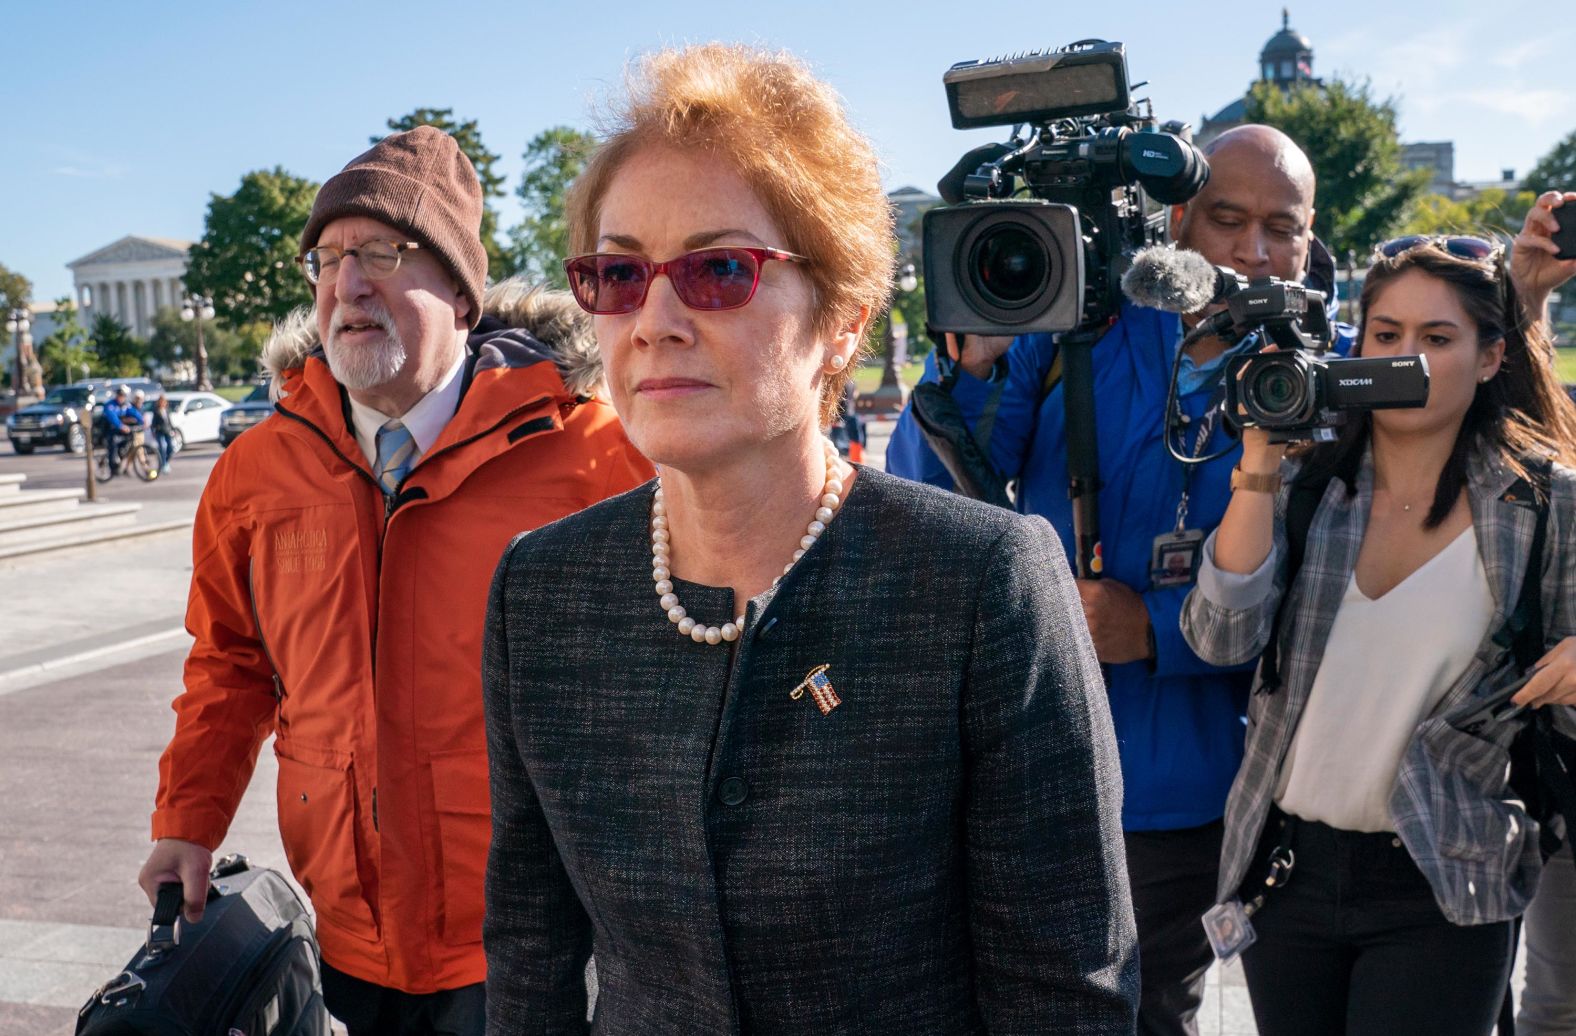 Marie Yovanovitch, former US ambassador to Ukraine, arrives on Capitol Hill on October 11. <a href="https://www.cnn.com/2019/10/11/politics/marie-yovanovitch-testimony-ukraine/index.html" target="_blank">She was scheduled to testify</a> before congressional lawmakers as part of the House impeachment inquiry. Yovanovitch was unexpectedly pulled from her position in the spring.